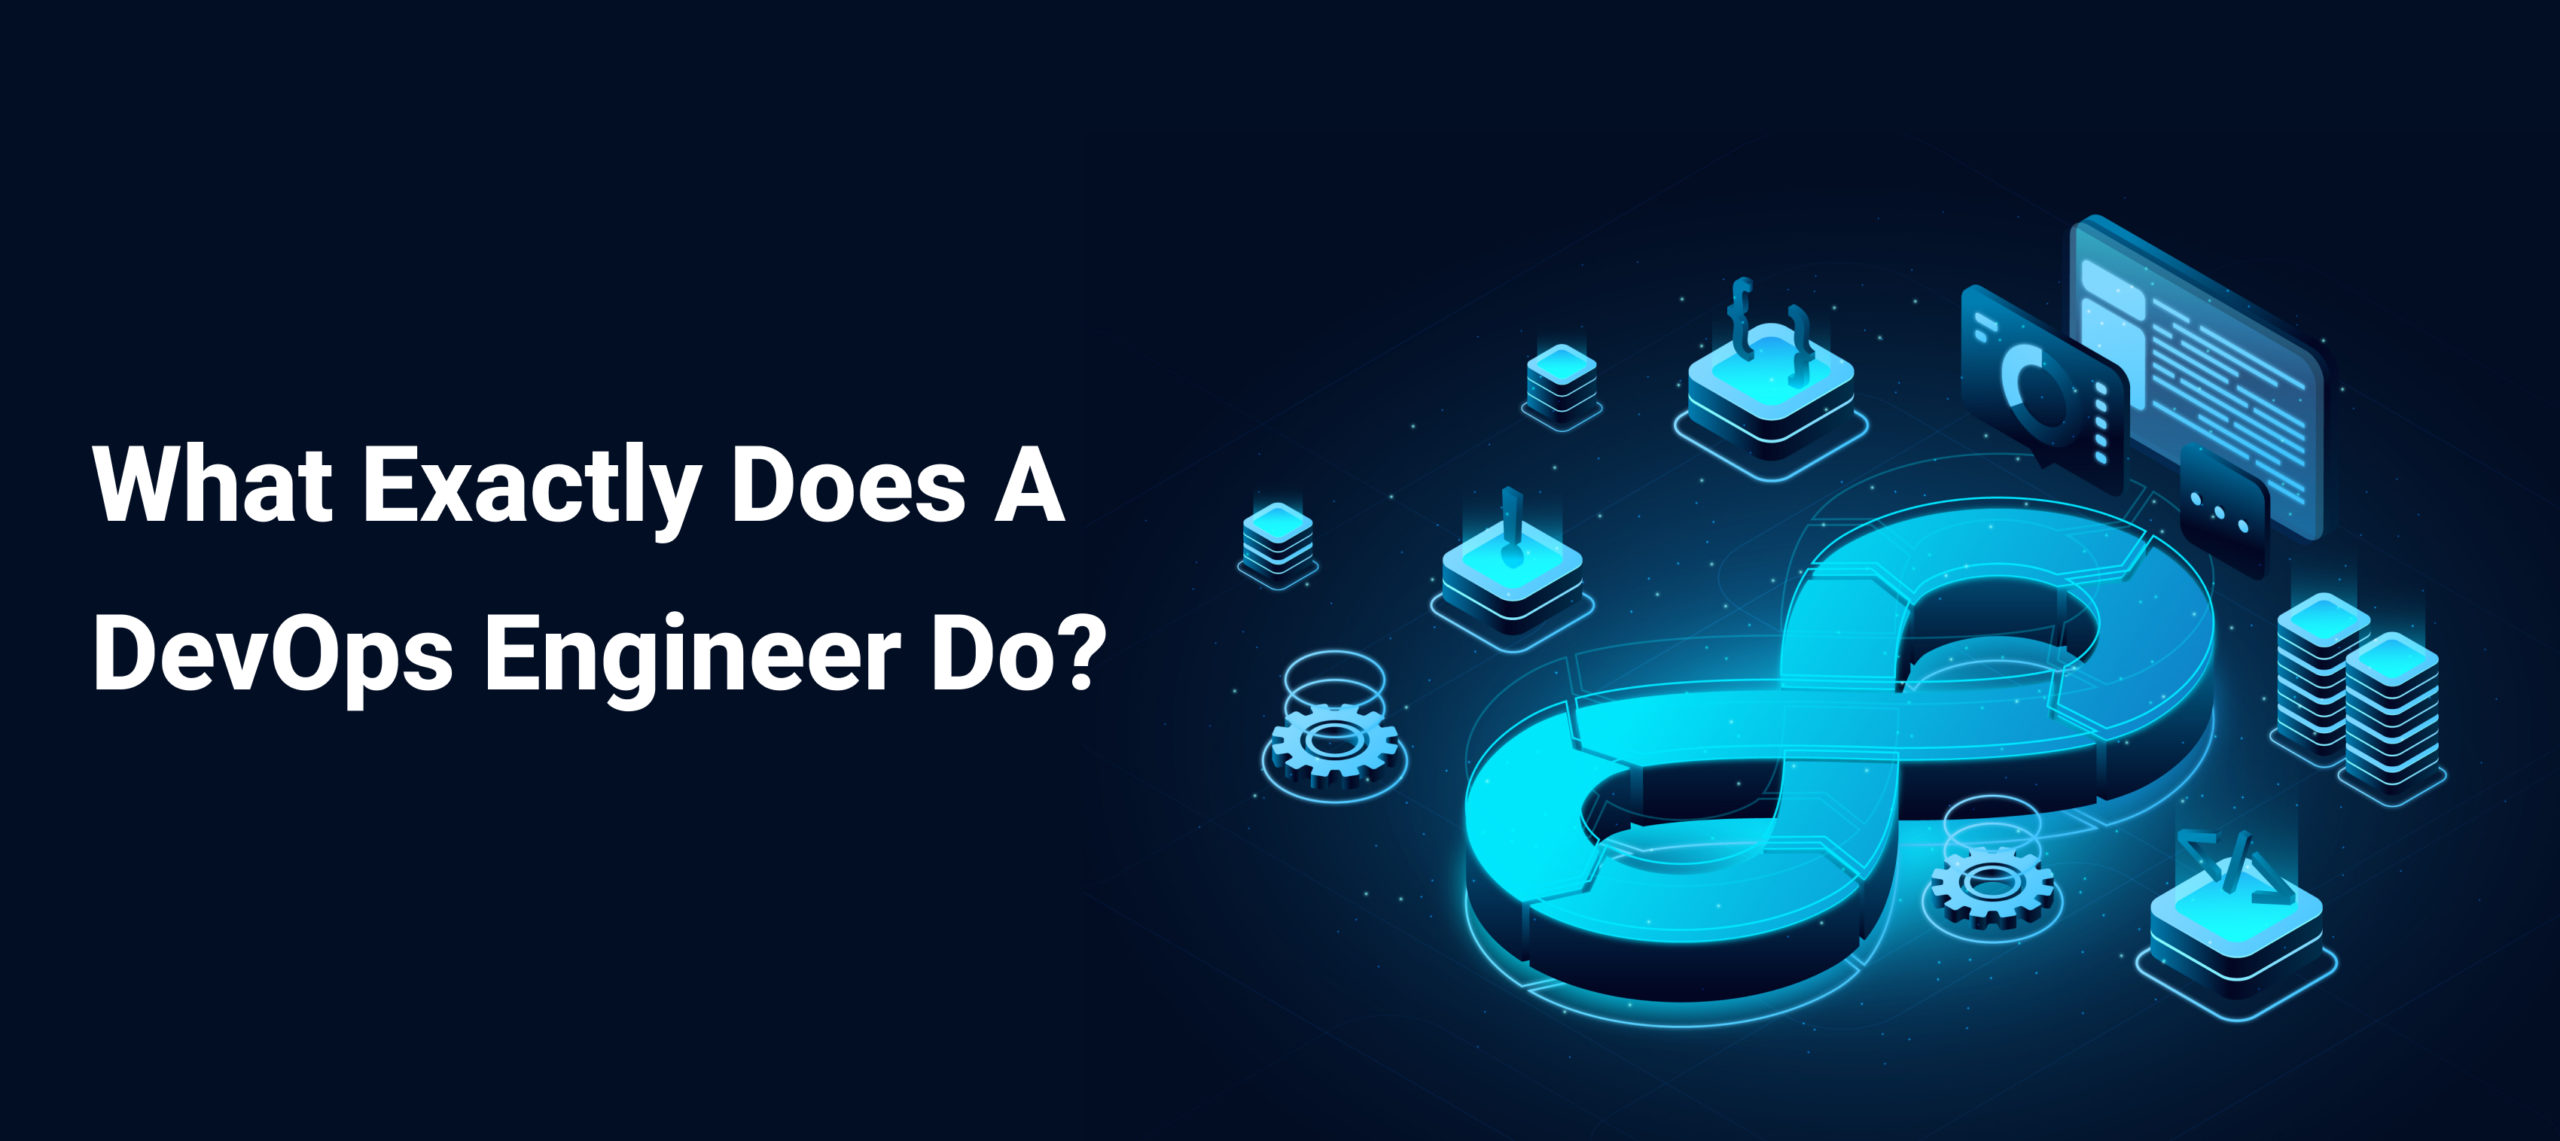  What Exactly Does A DevOps Engineer Do?